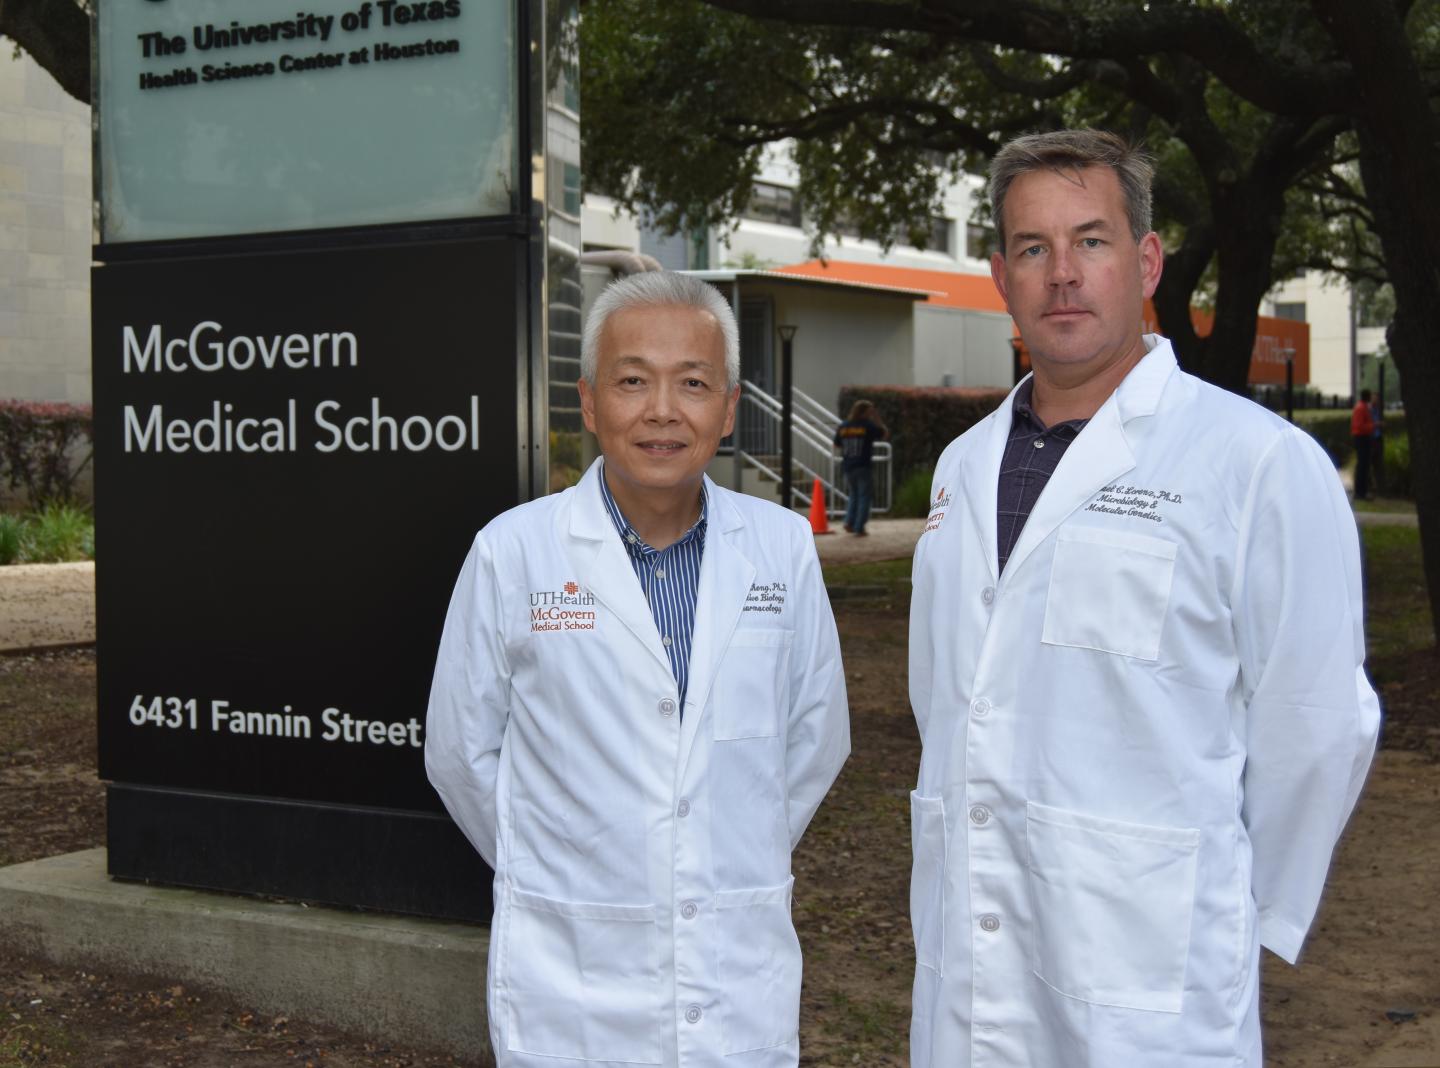 Michael Lorenz, Ph.D. and Xiaodong Cheng, Ph.D.,  	University of Texas Health Science Center at Hous